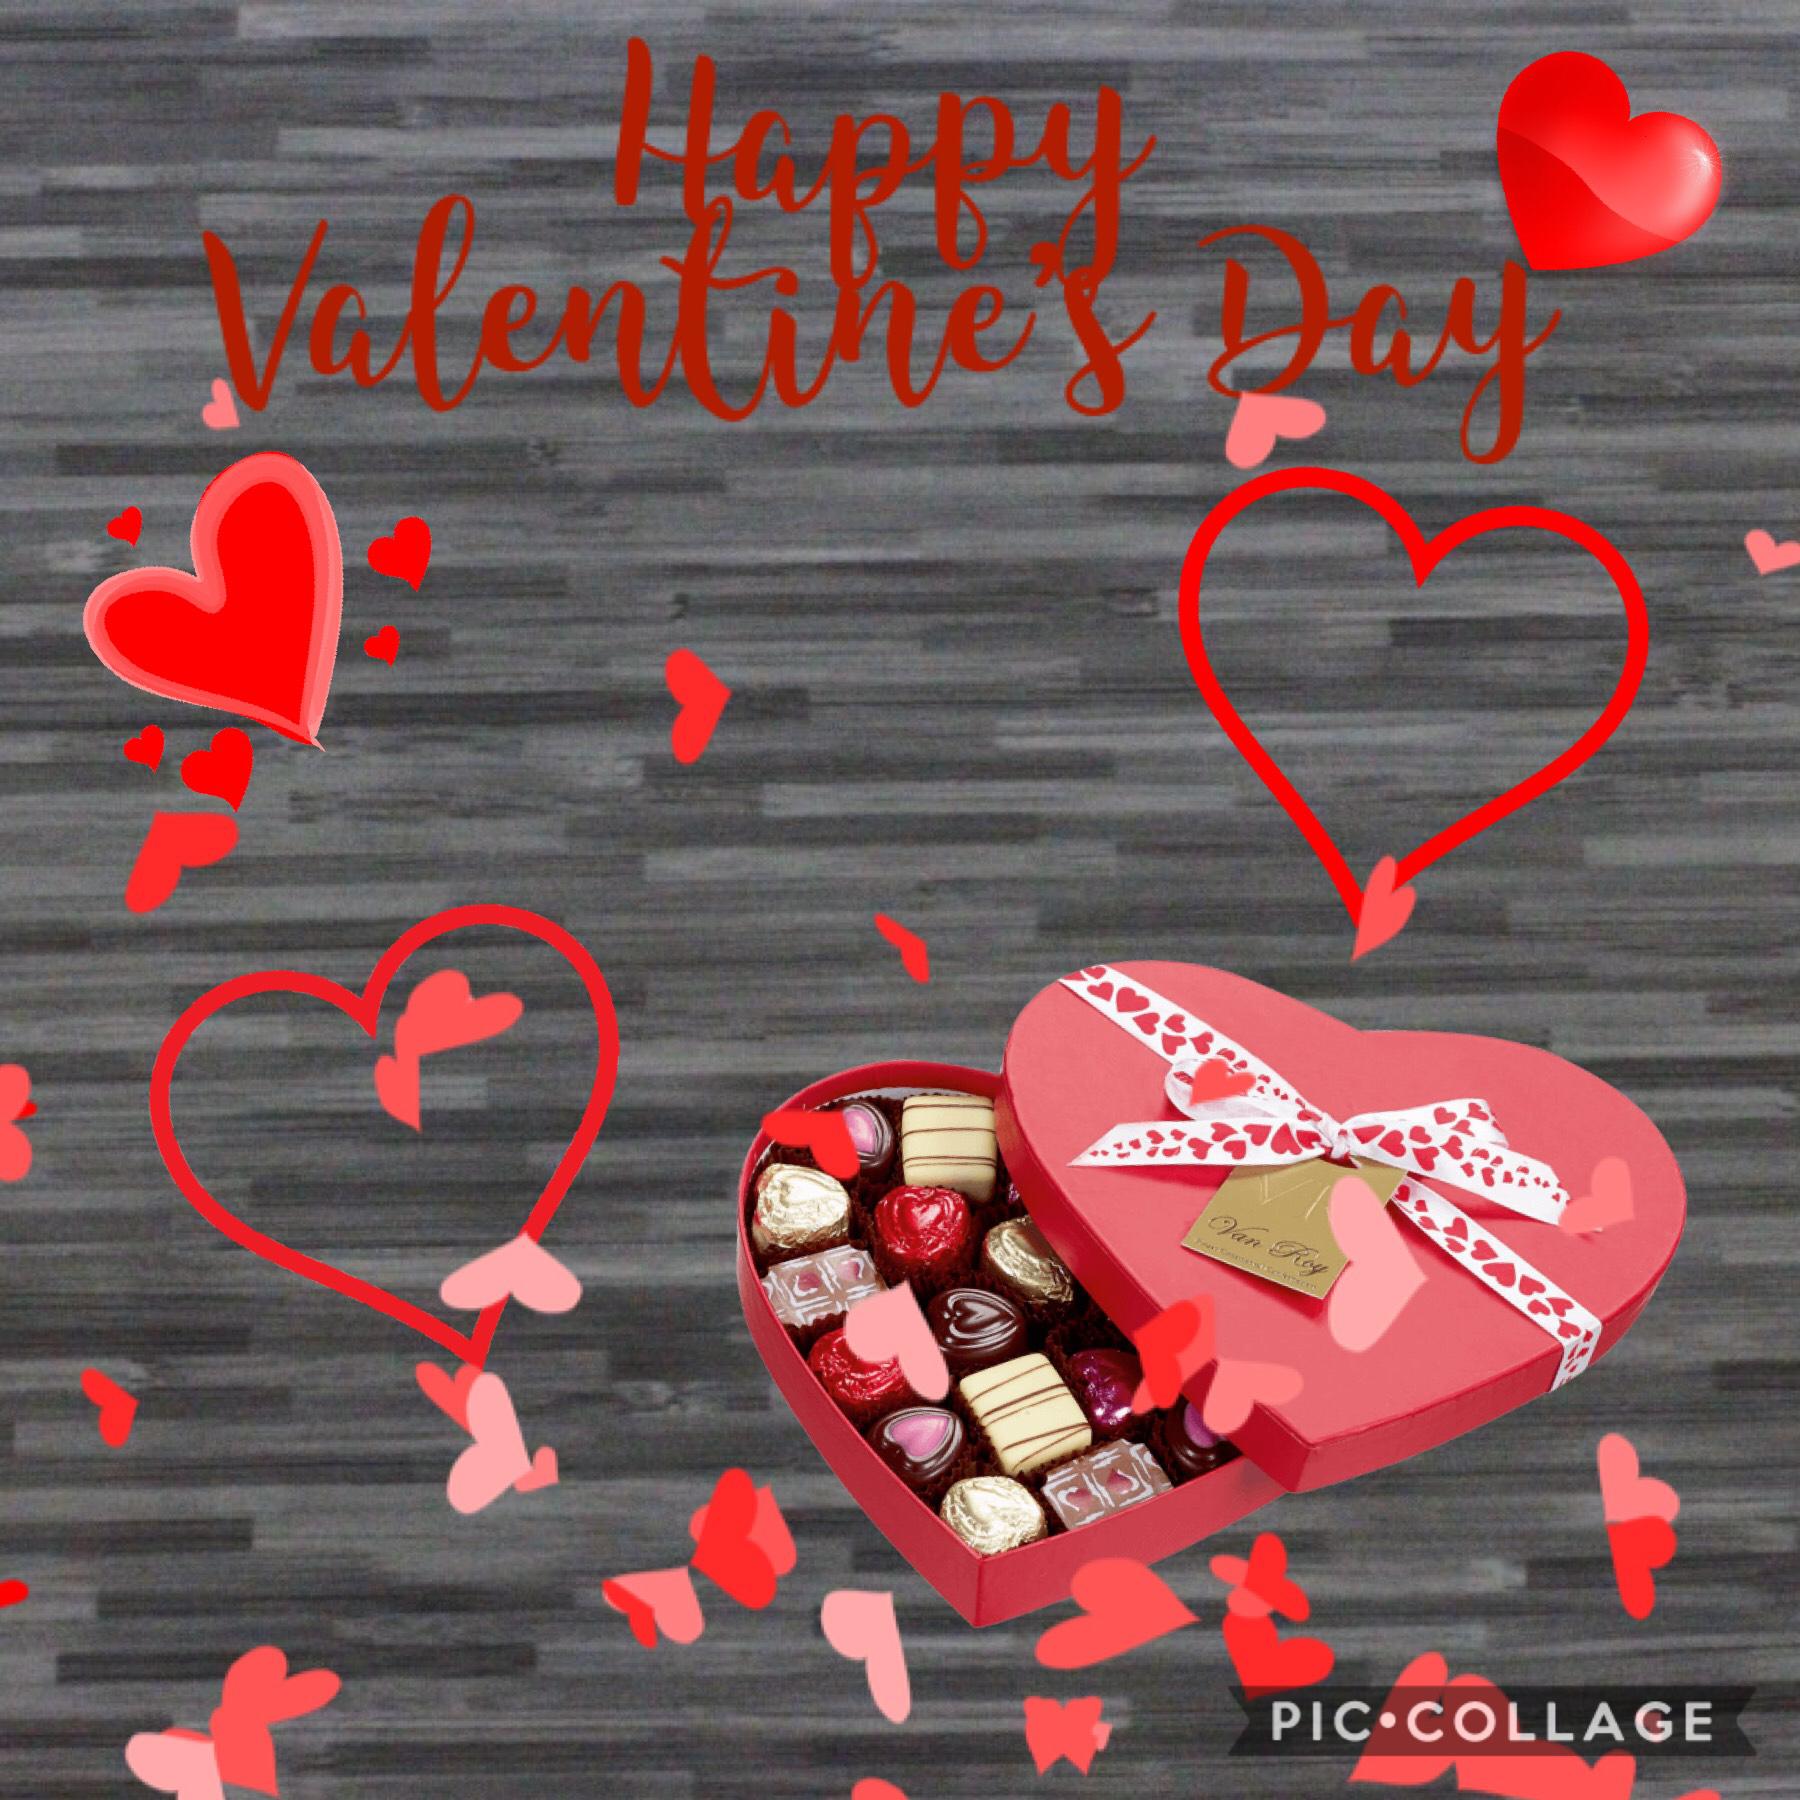 Happy Valentines (click)
❤️❤️❤️❤️
Happy Valentine’s Day!!
Or in Swedish:
Glad Alla Hjärtans dag!!
❤️❤️❤️❤️
I Hope you have a good Valentine’s Day!!
I hope you don’t get alone!
❤️❤️❤️❤️
SPREAD LOVE
(Like,Comment,Follow and share)